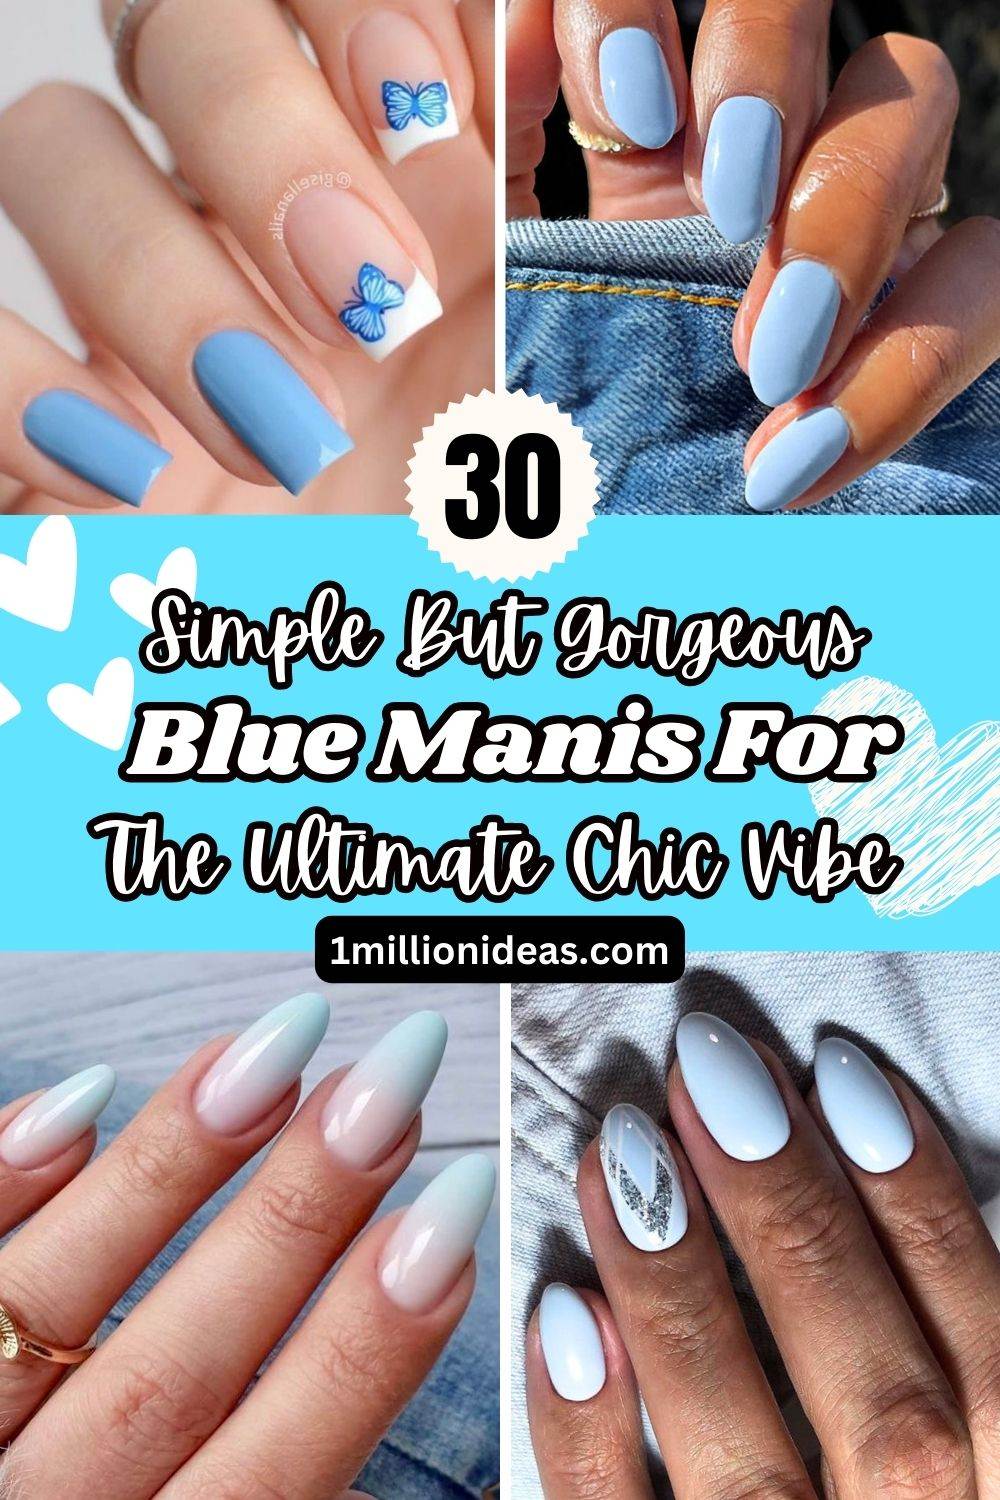 30 Simple But Gorgeous Blue Manis For The Ultimate Chic Vibe - 191